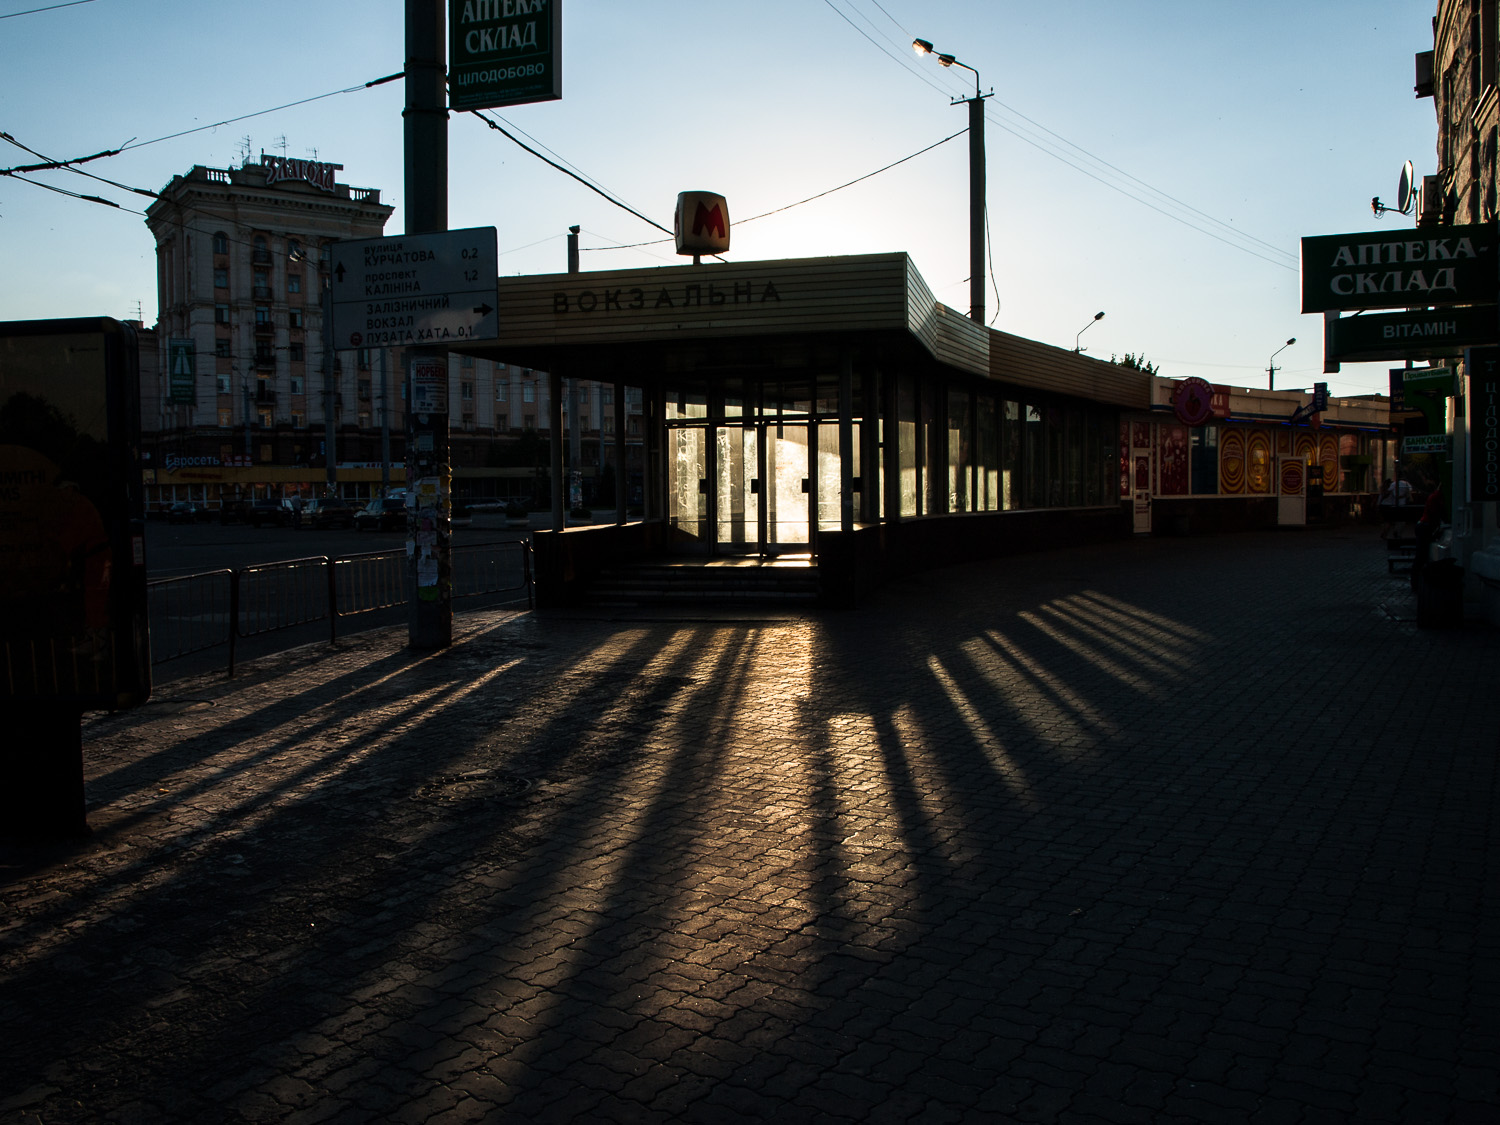  The entrance to a metro station in the city of Dnipro. 